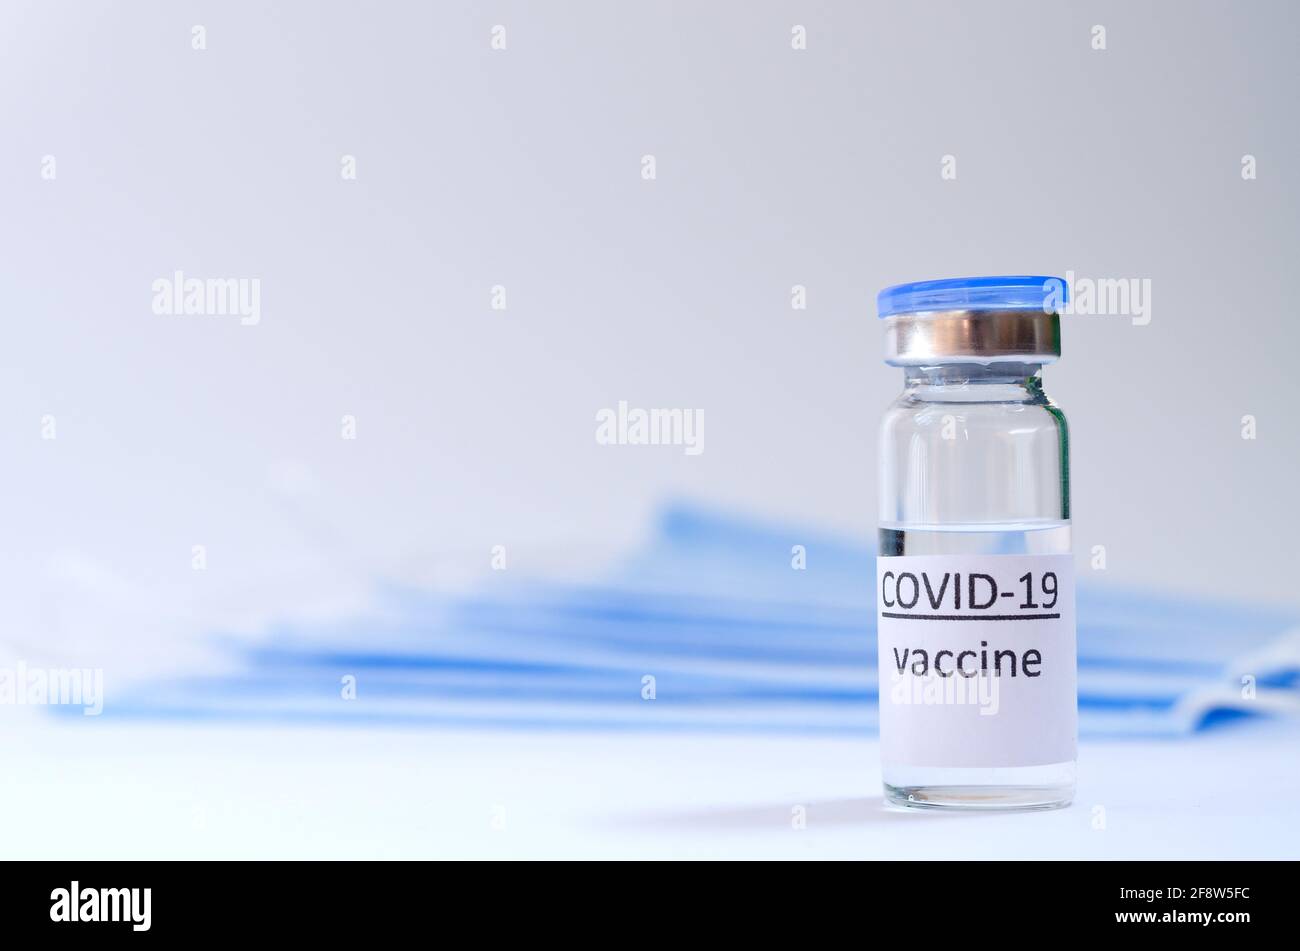 Creative ideas of vaccination concept. Top view of syringe with medical masks and vaccine vial glass bottles for vaccination against COVID-19. Stock Photo